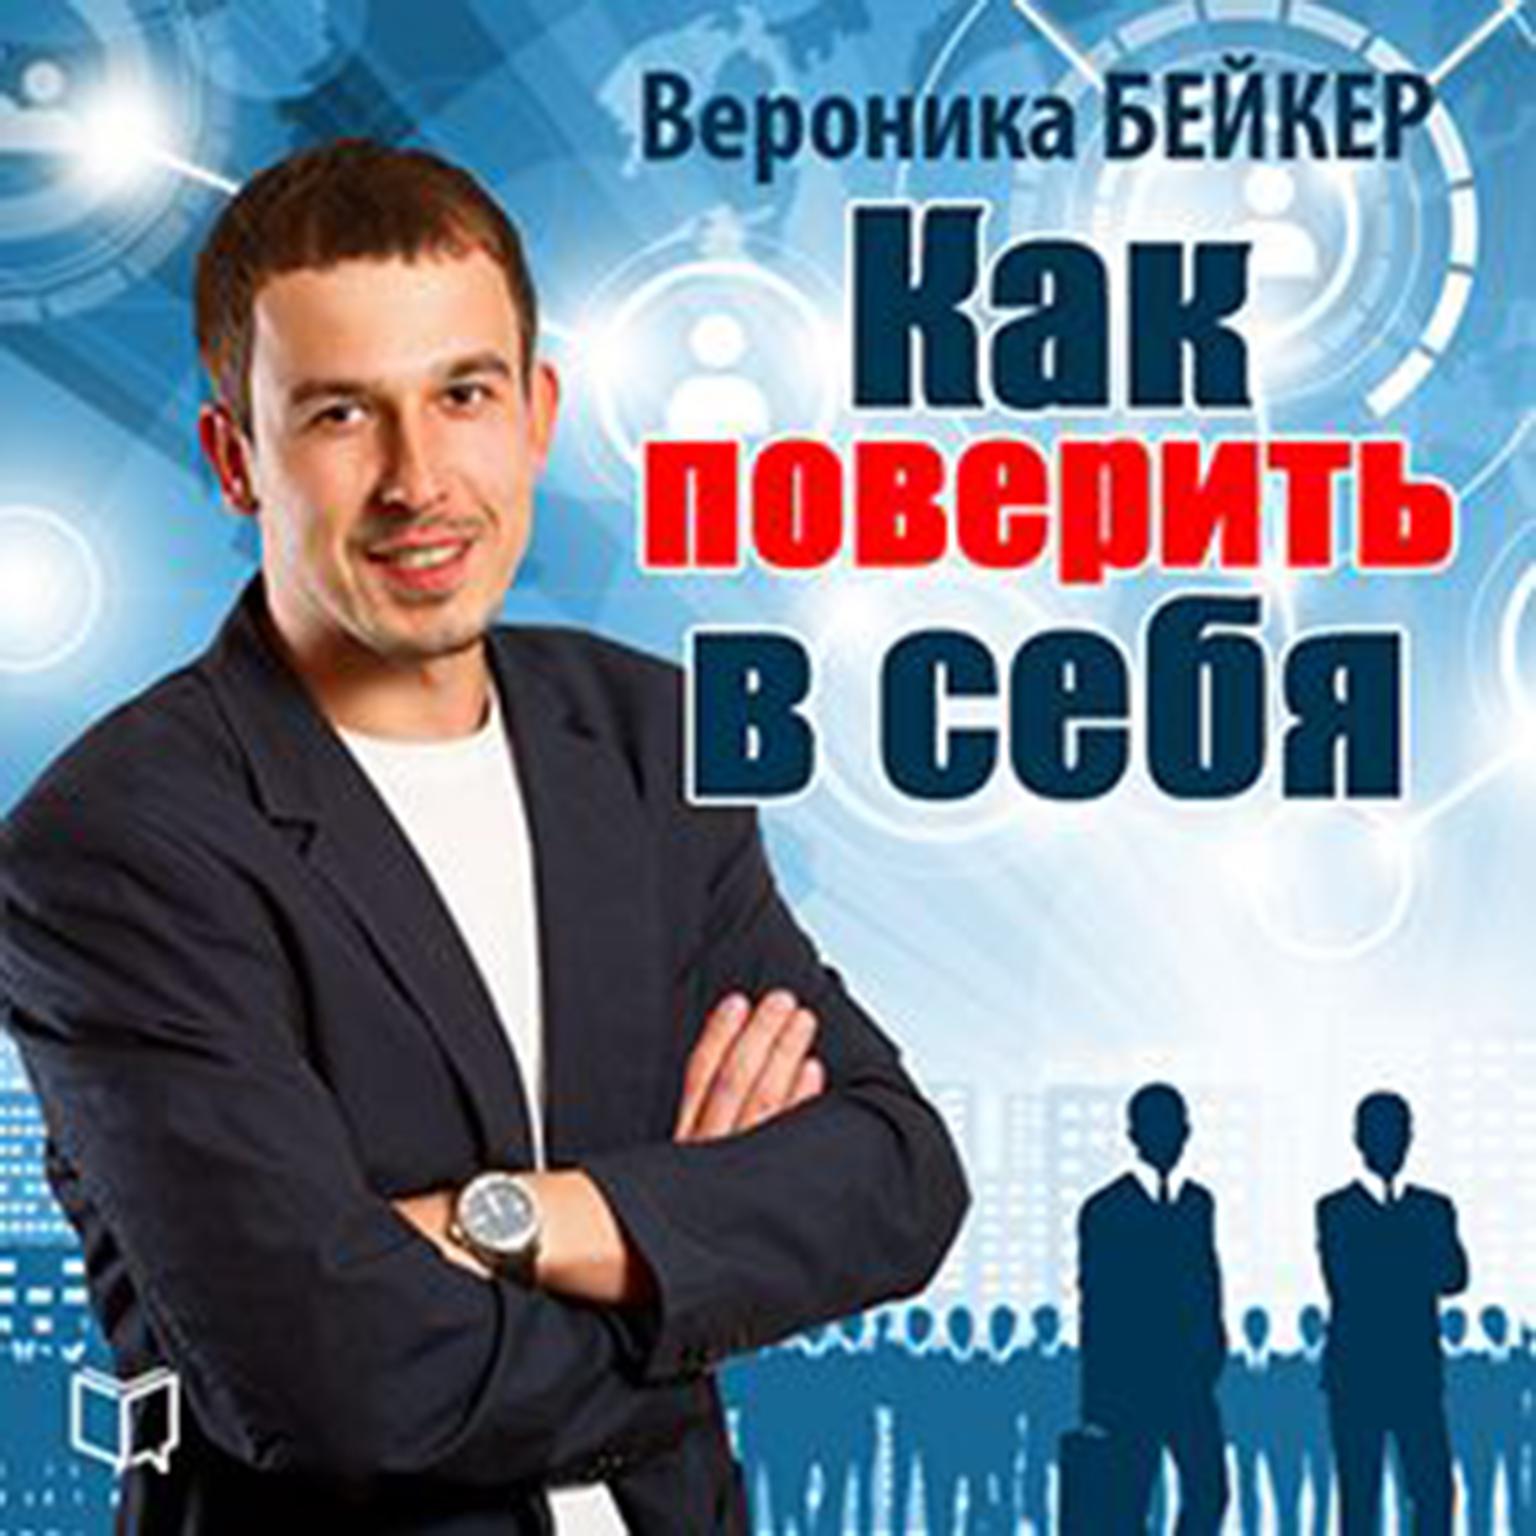 How to Believe in Yourself [Russian Edition] Audiobook, by Veronica Baker